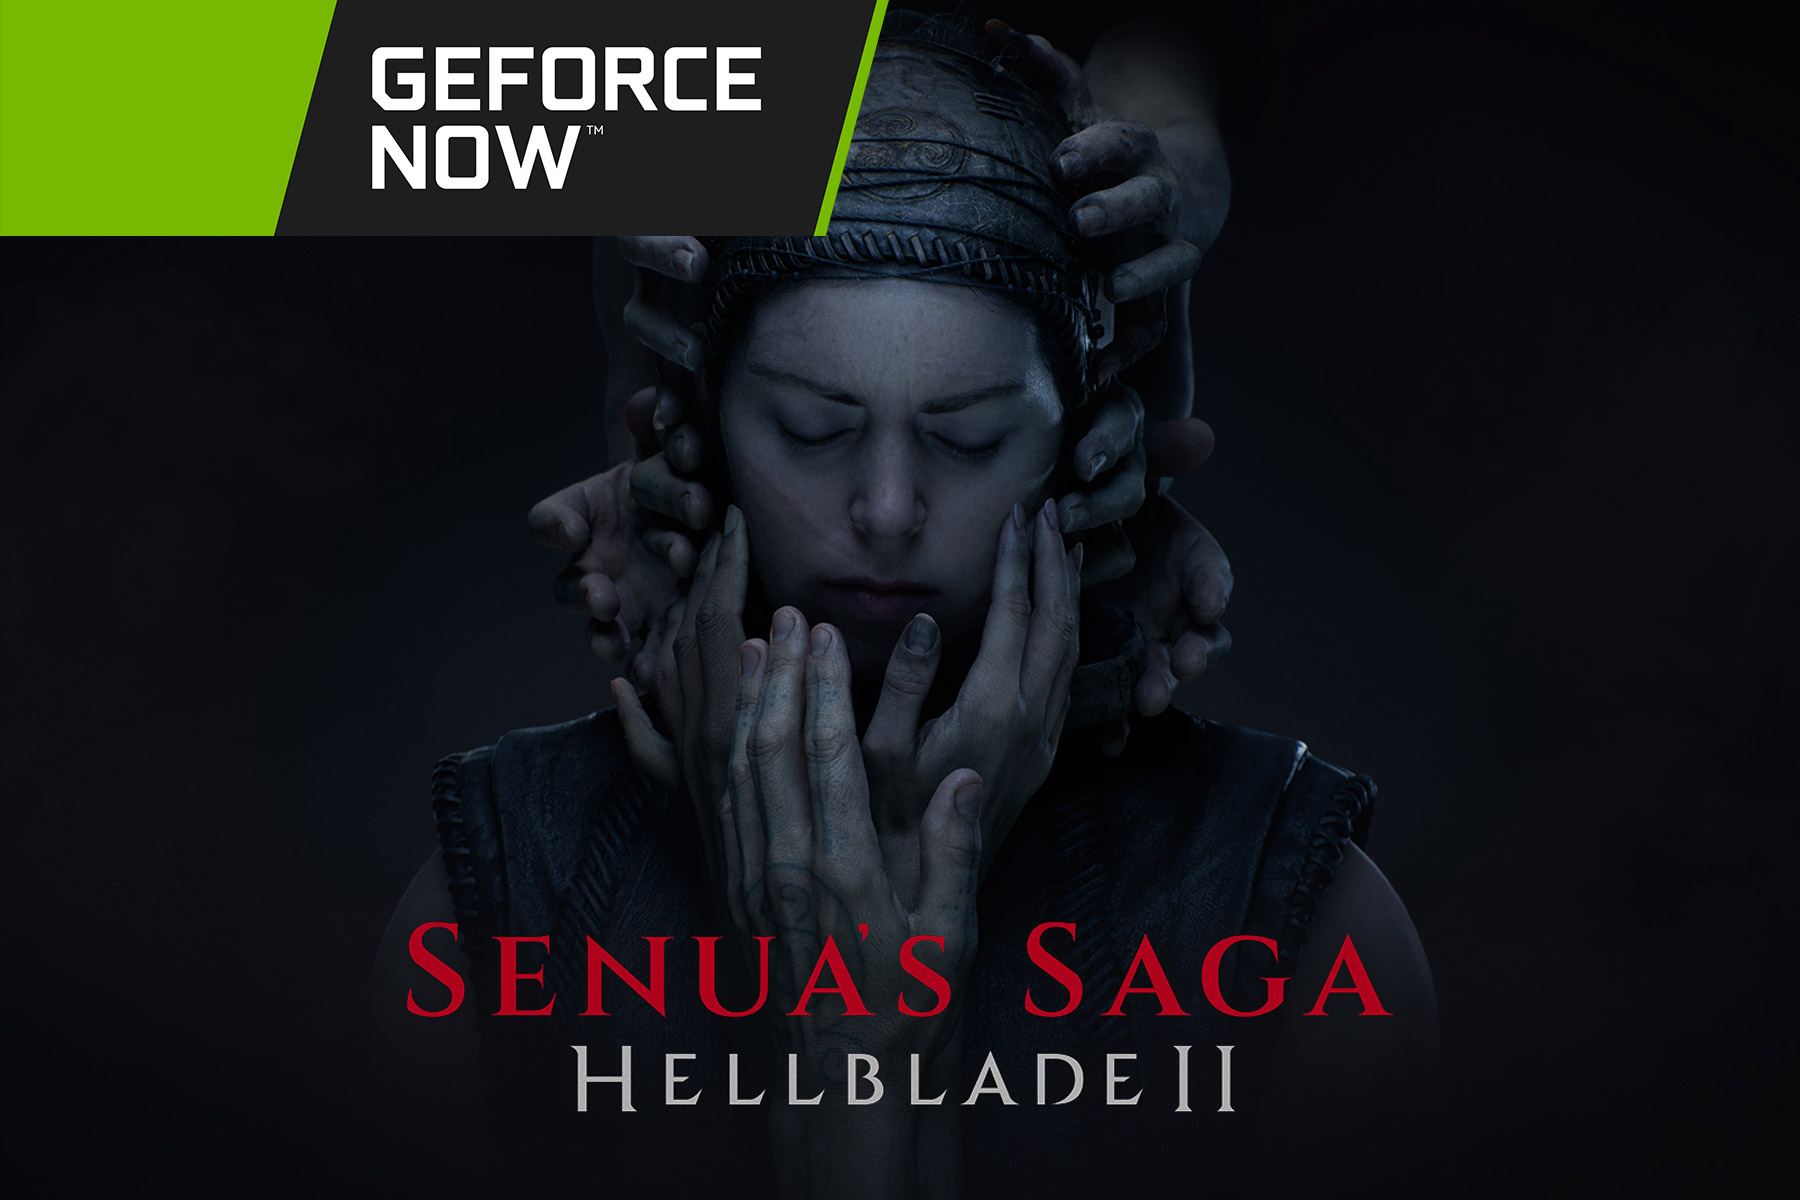 Hellblade 2 arrived on NVIDIA GeForce NOW on launch day